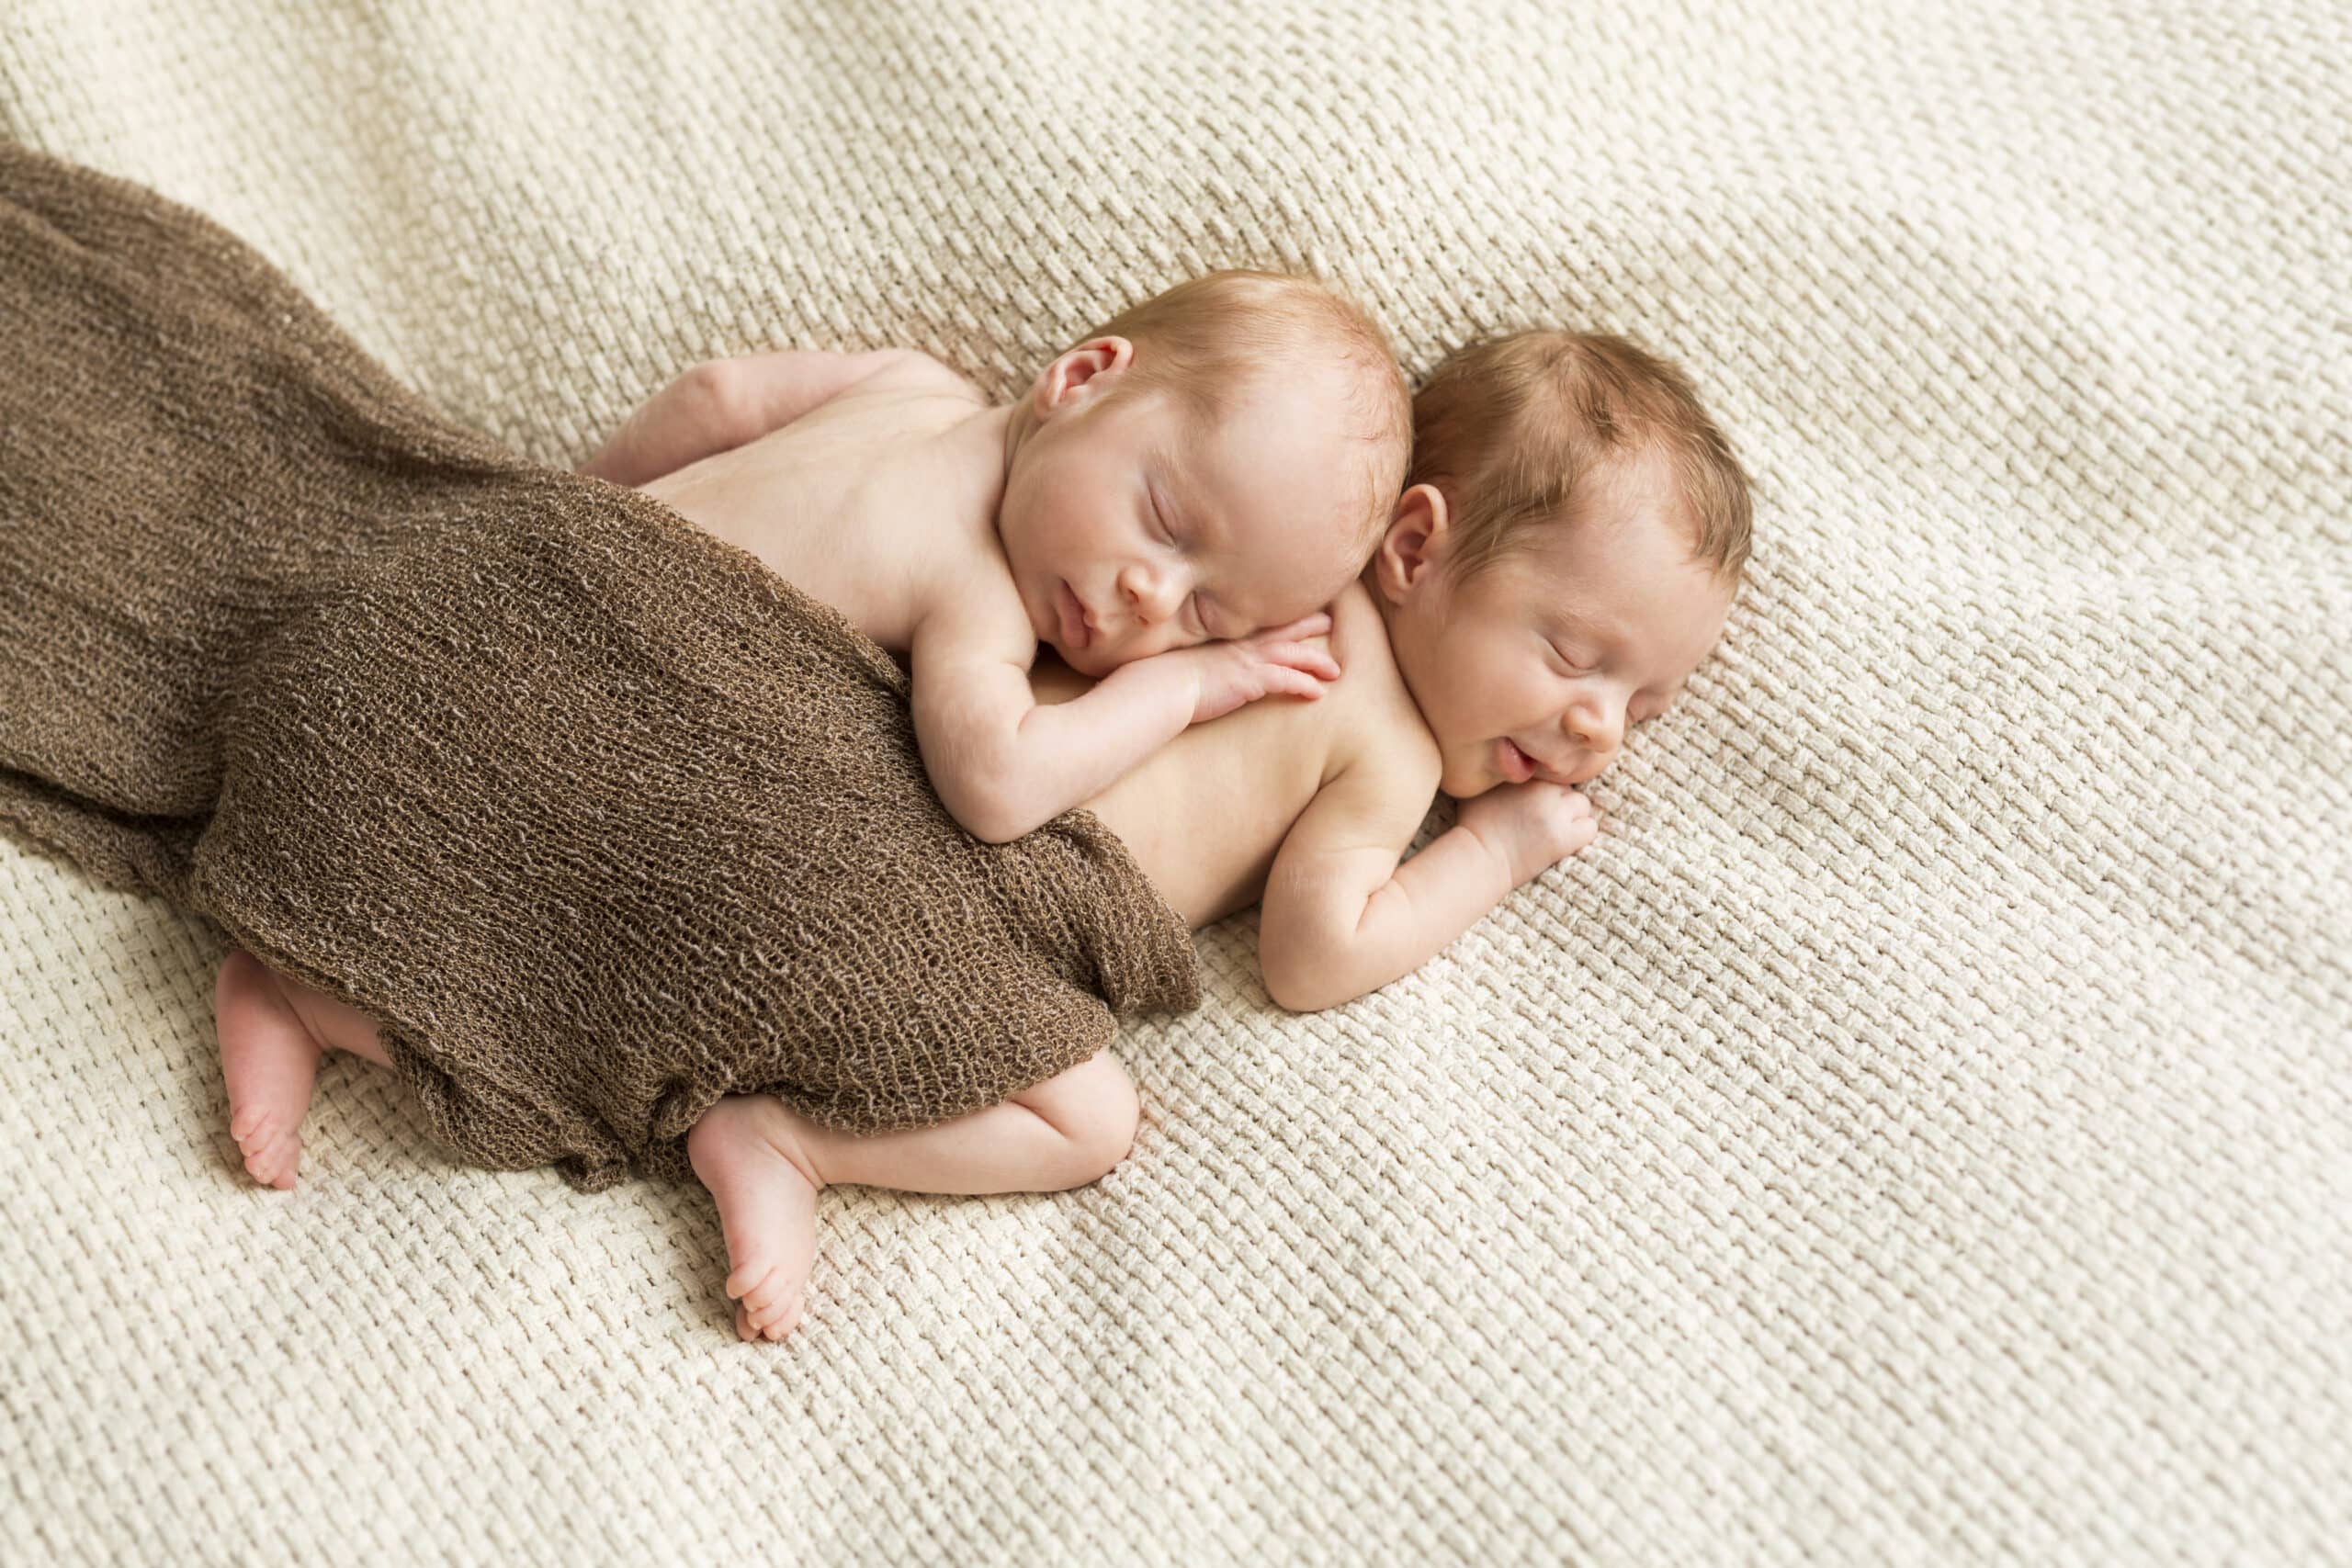 Newborn twins covered with a cloth sleeping on blanket